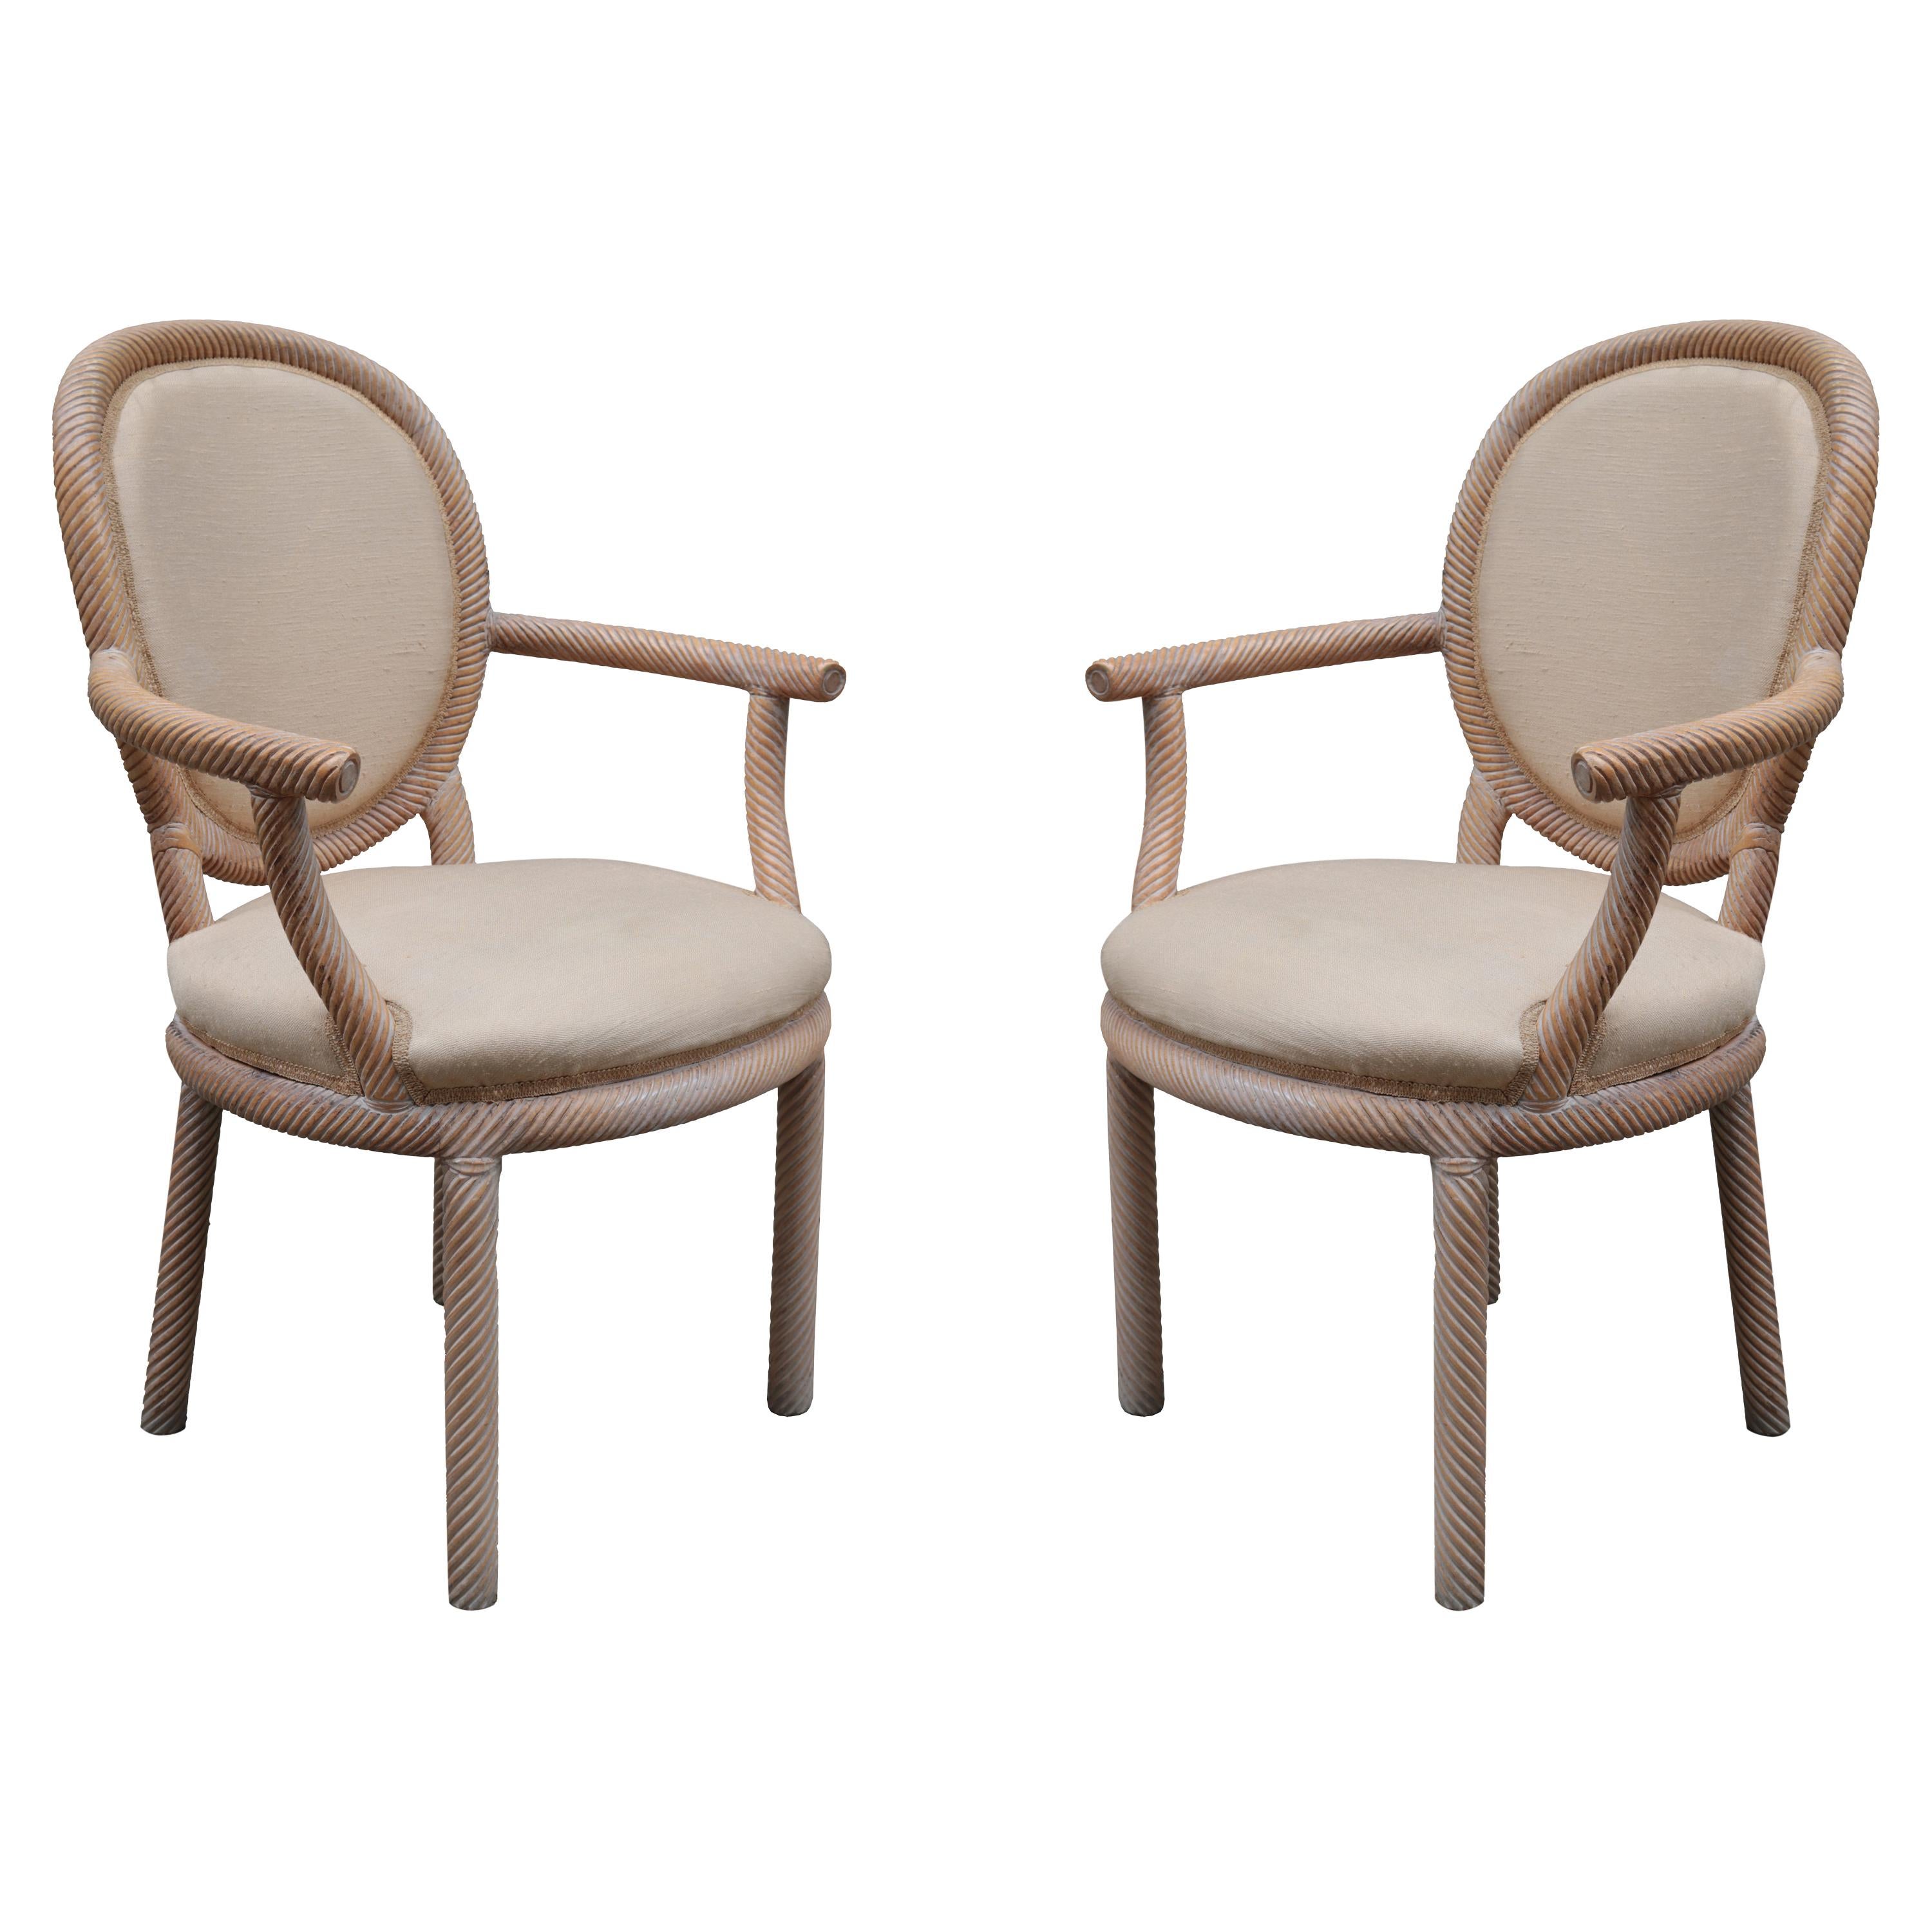 Pair of Carved Armchairs by Arpex